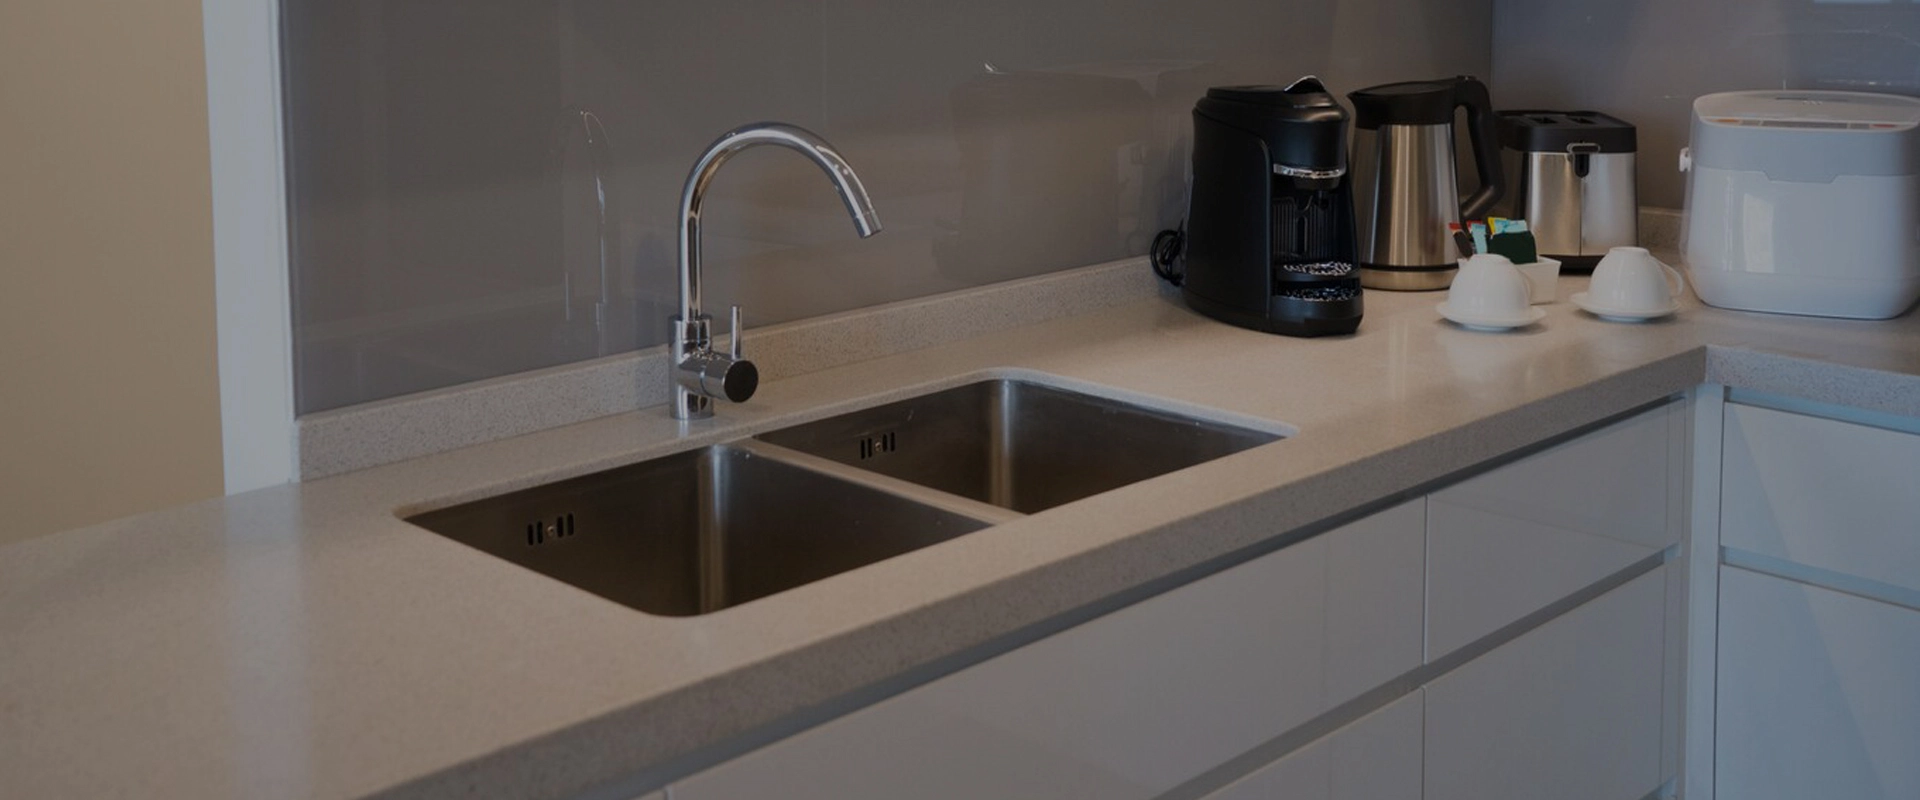 What Is The Most Common Stainless Steel Kitchen Sink Size?